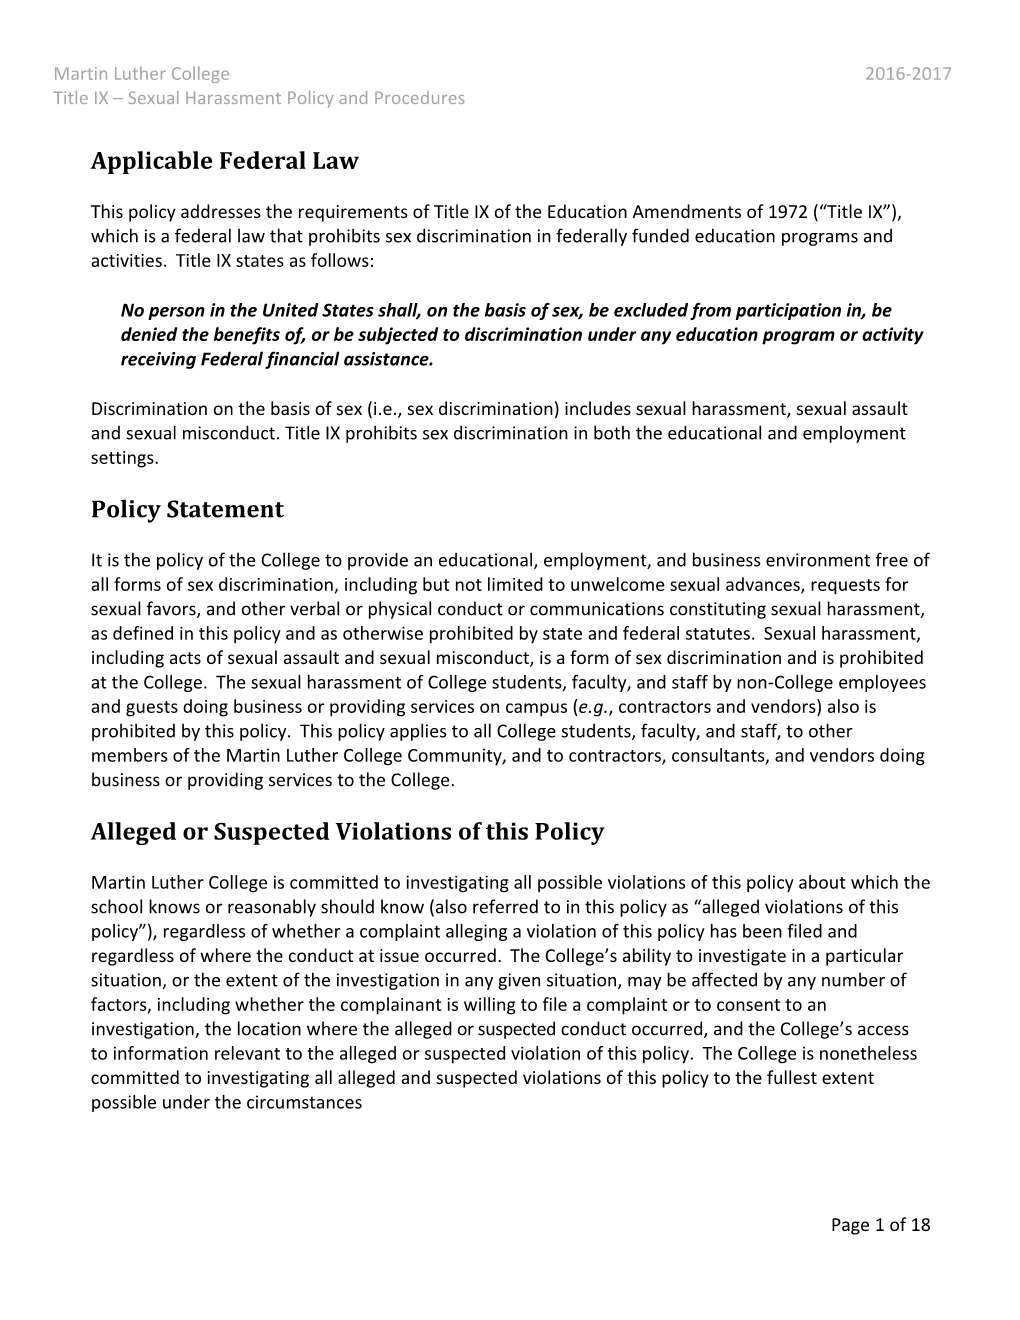 Title IX Sexual Harassment Policy and Procedures